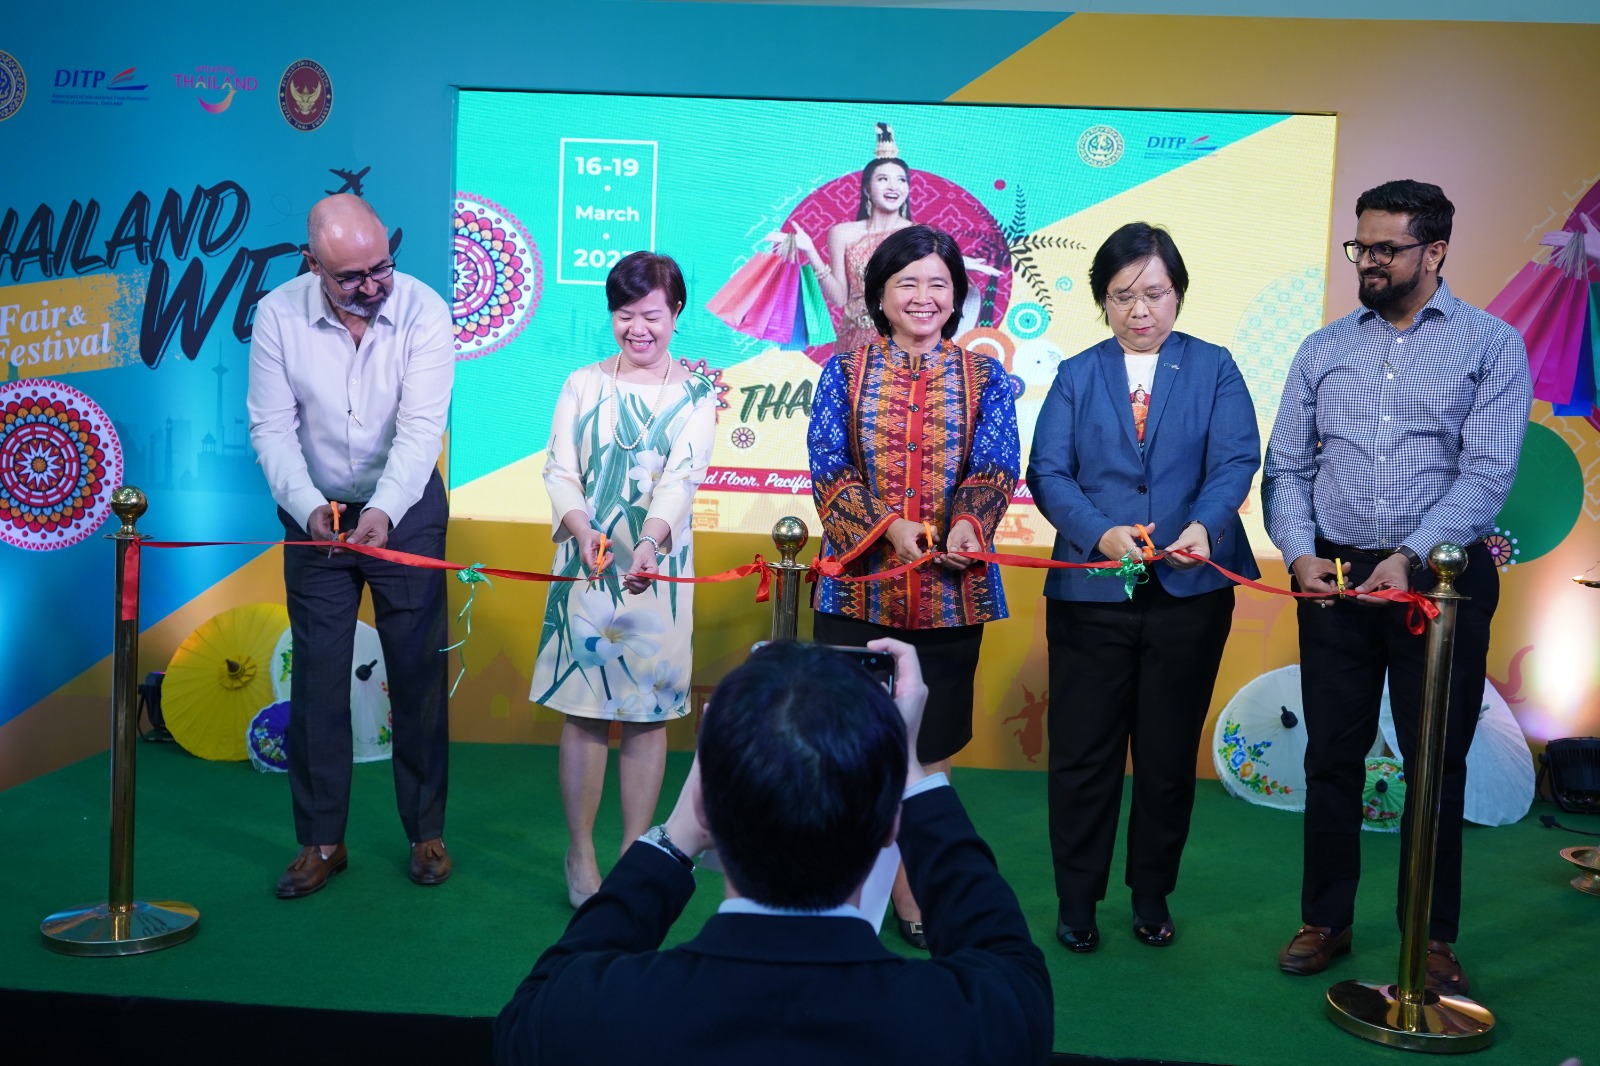 Thailand’s Ministry of Commerce, Department of International Trade Promotion (DITP) organises Thailand Week Trade Fair & Festival 2023 at New Delhi